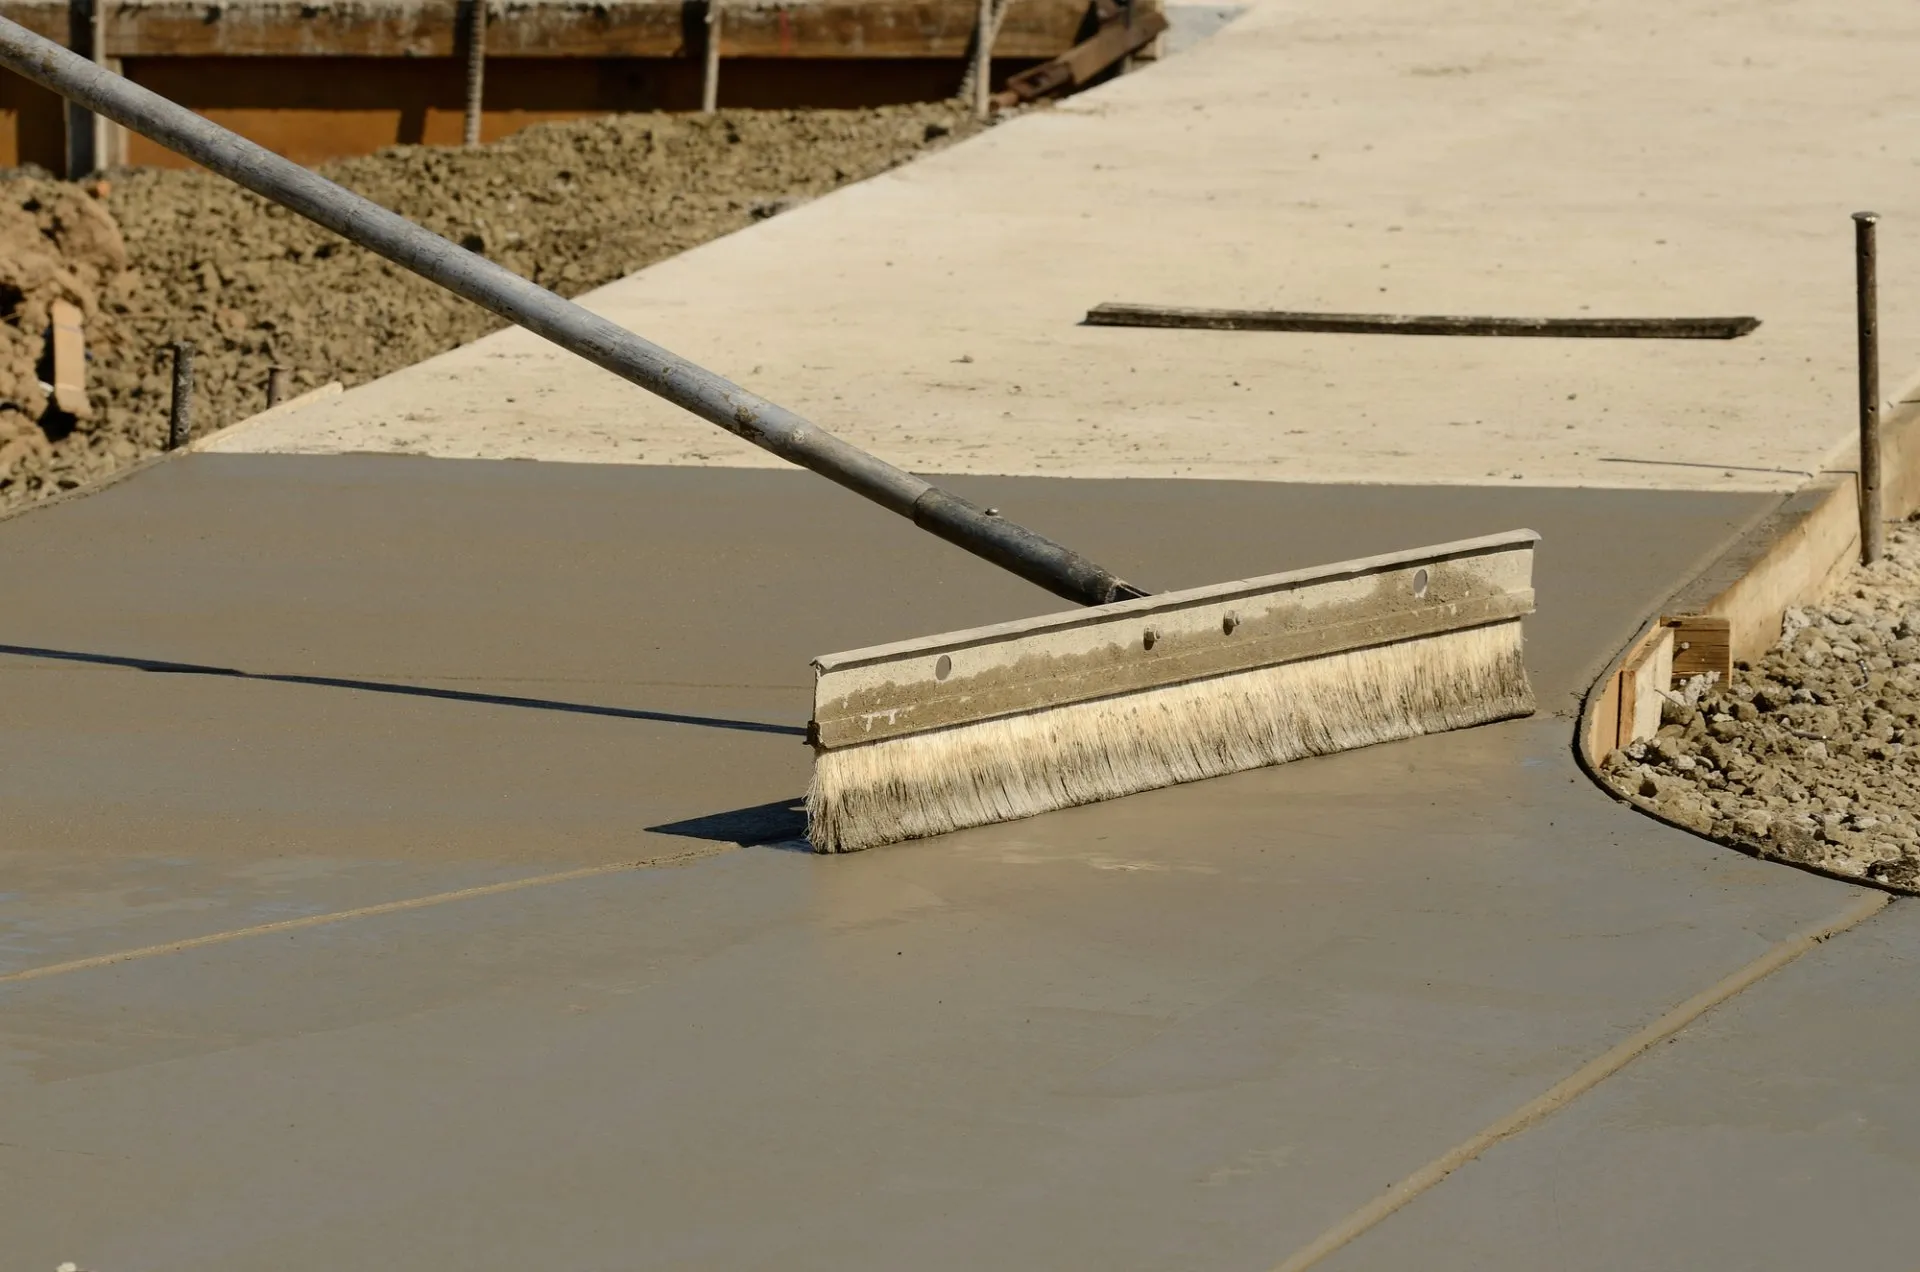 An industrial-grade broom is used to smooth the wet surface of a freshly poured concrete sidewalk at a construction site. The surrounding area shows dirt and other construction-related activities. For all your concrete needs, trust Reno Concrete Solutions for expert service and free quotes.